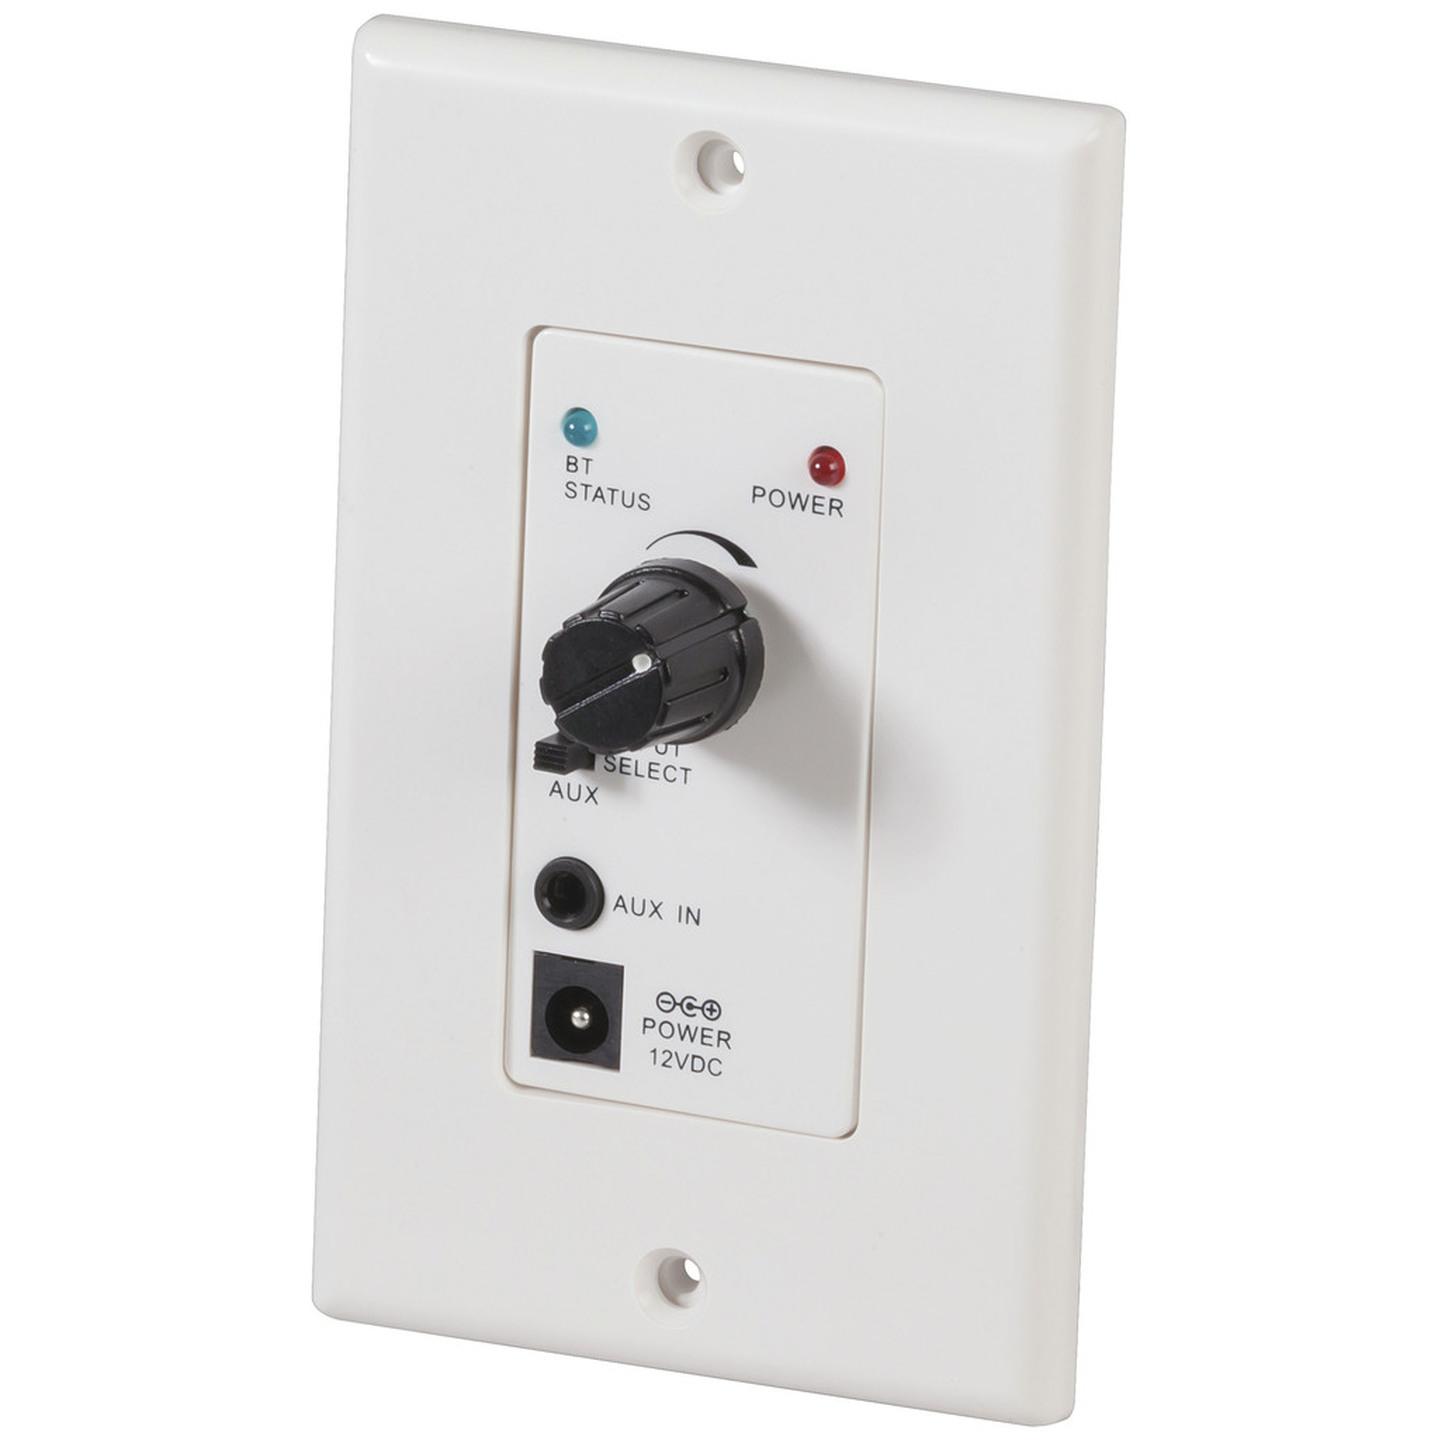 Stereo Amplifier Wall Plate with Bluetooth Audio